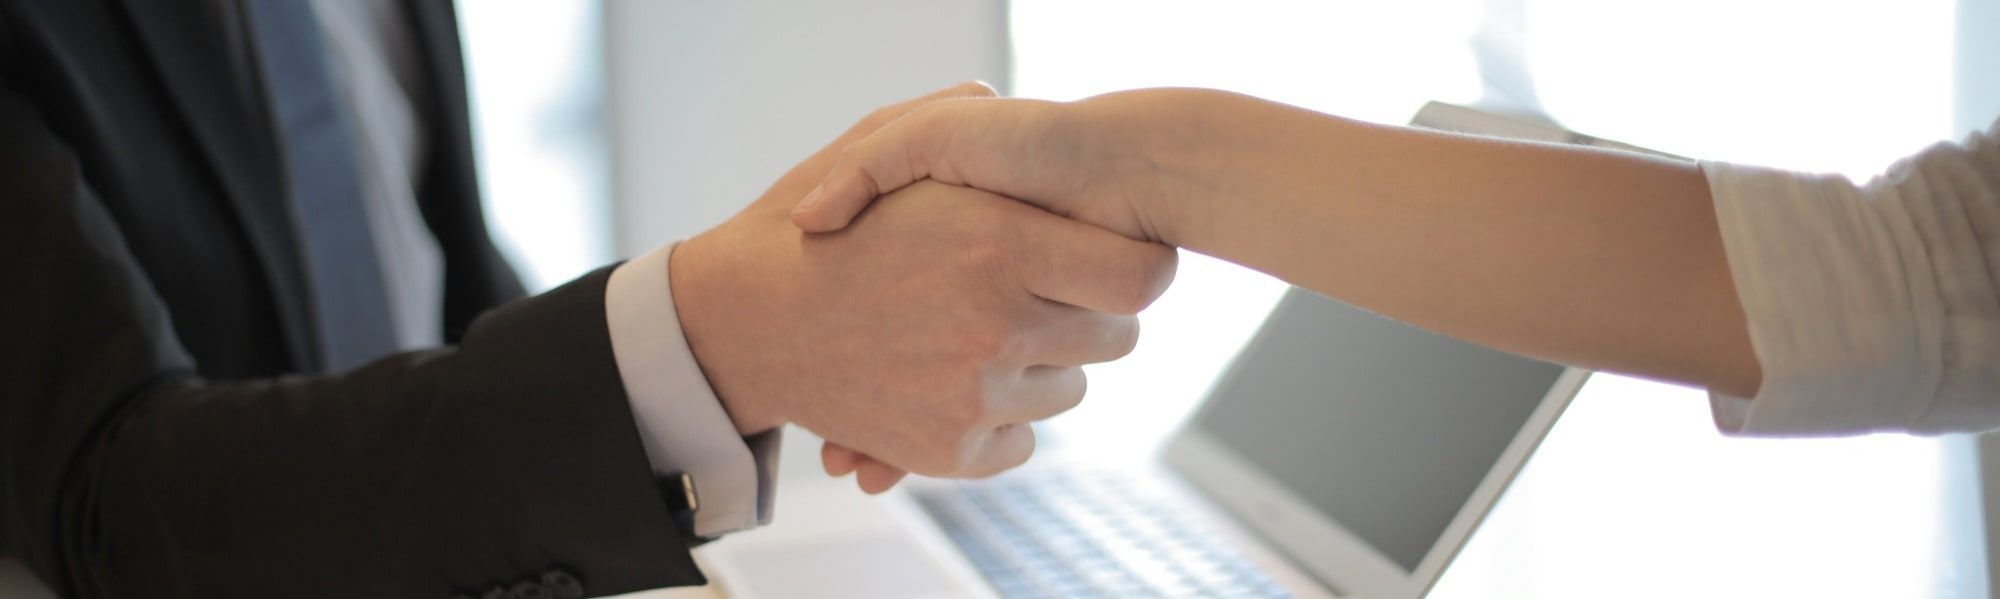 close up picture of 2 people shaking hands